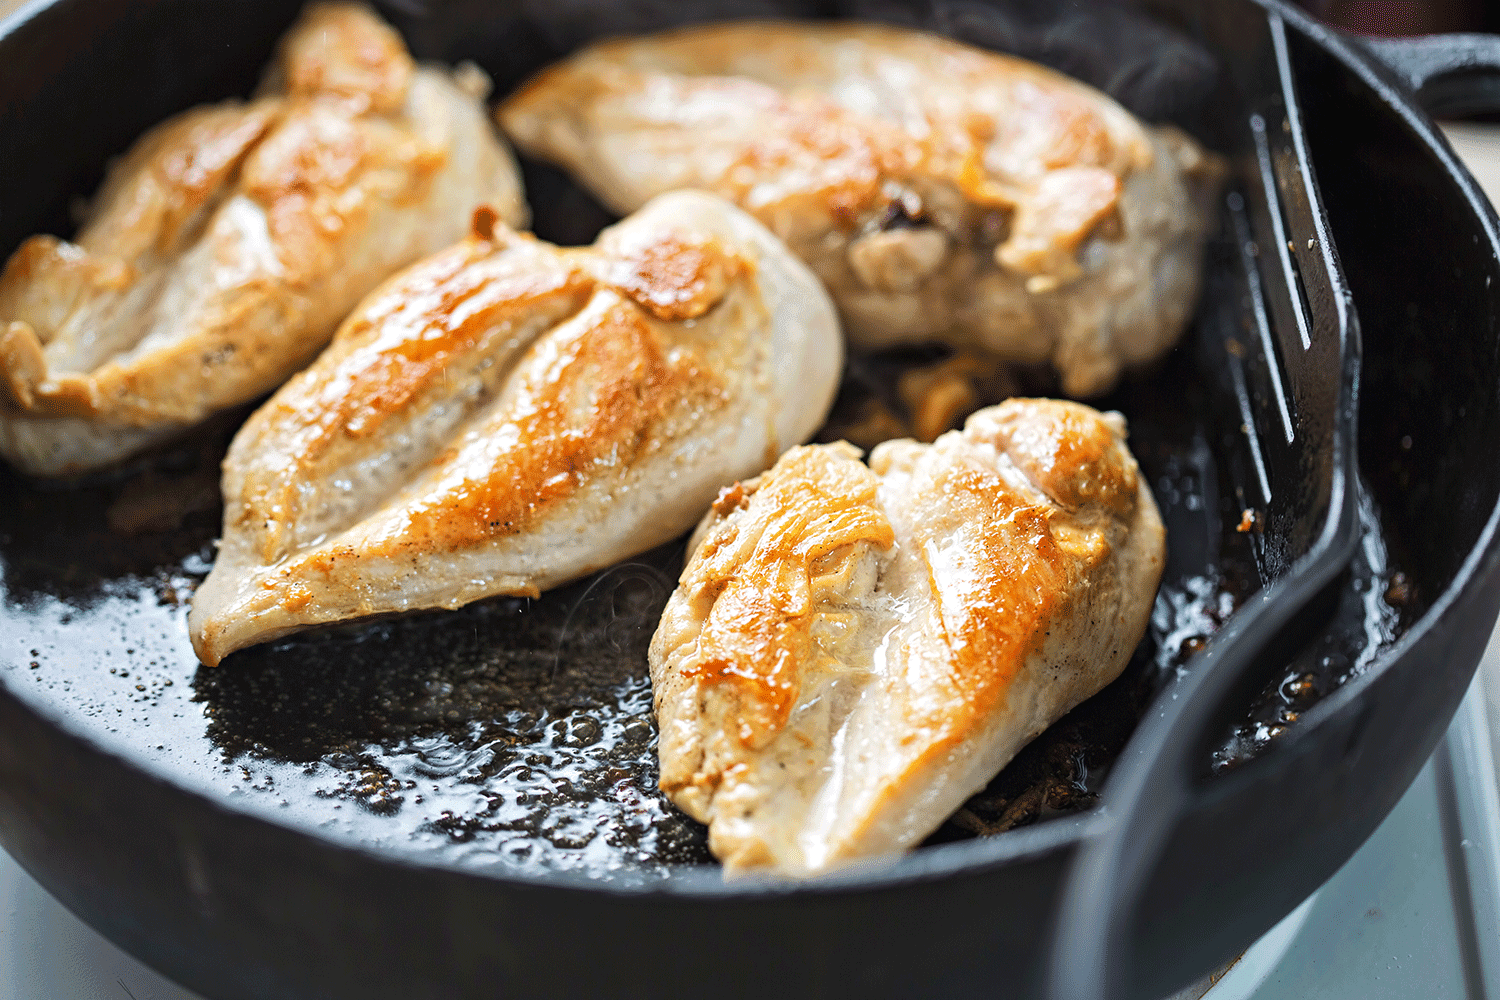 Fried chicken breasts on vegetable oil, iron cast pan